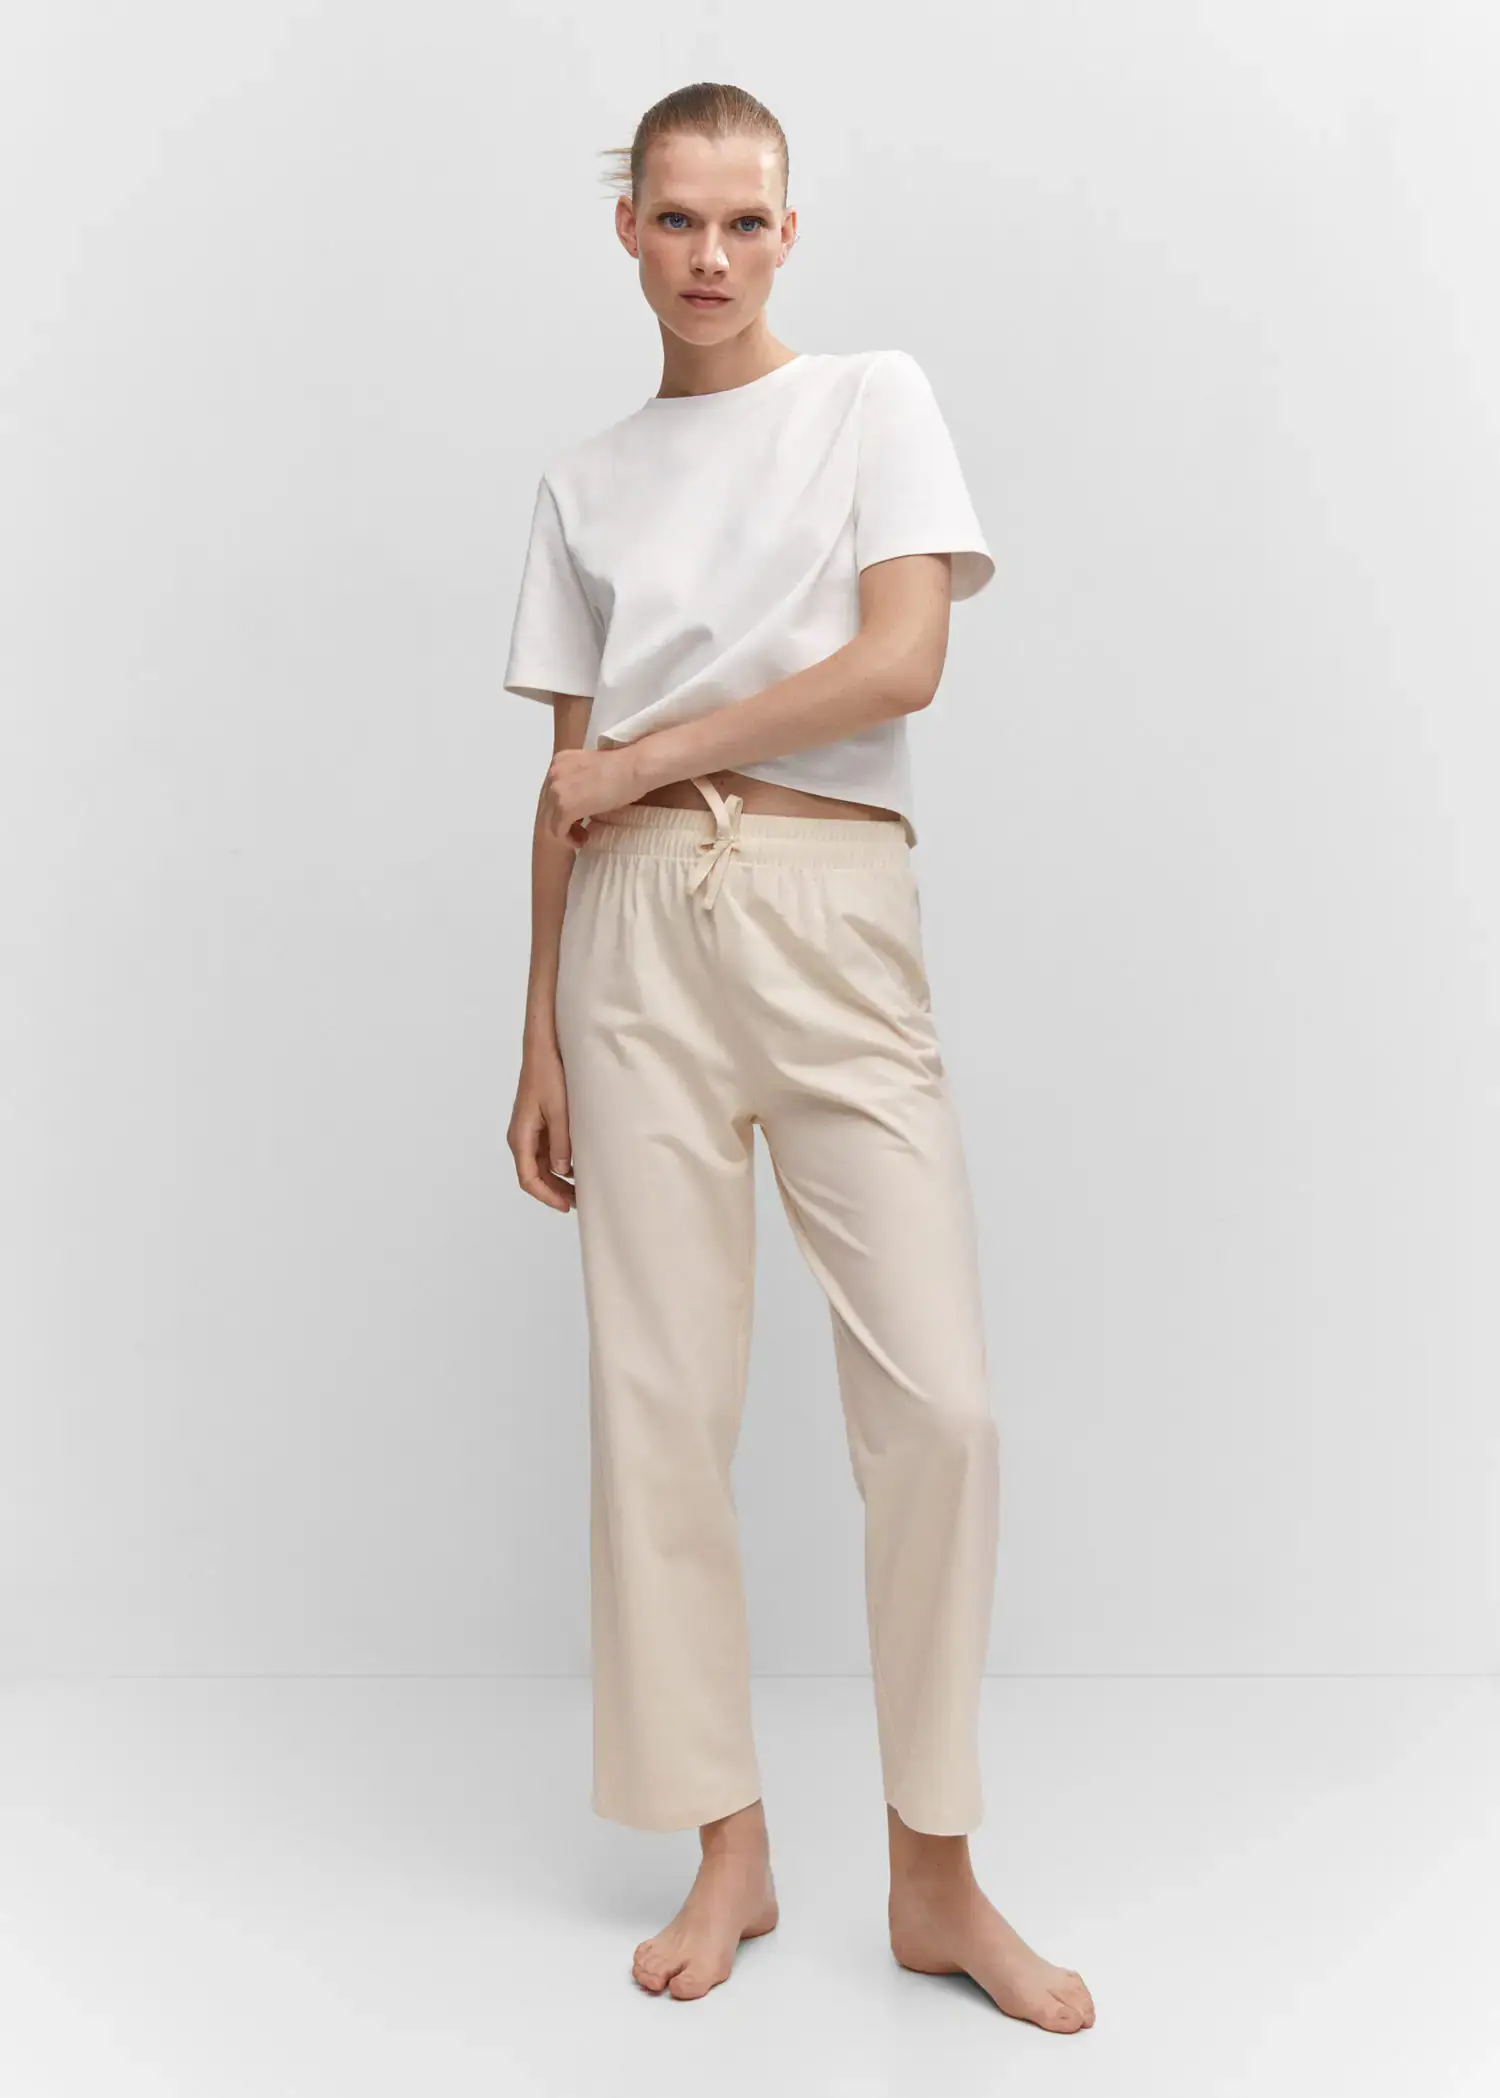 Mango Cotton-knit pants. a person standing wearing a white shirt and beige pants. 